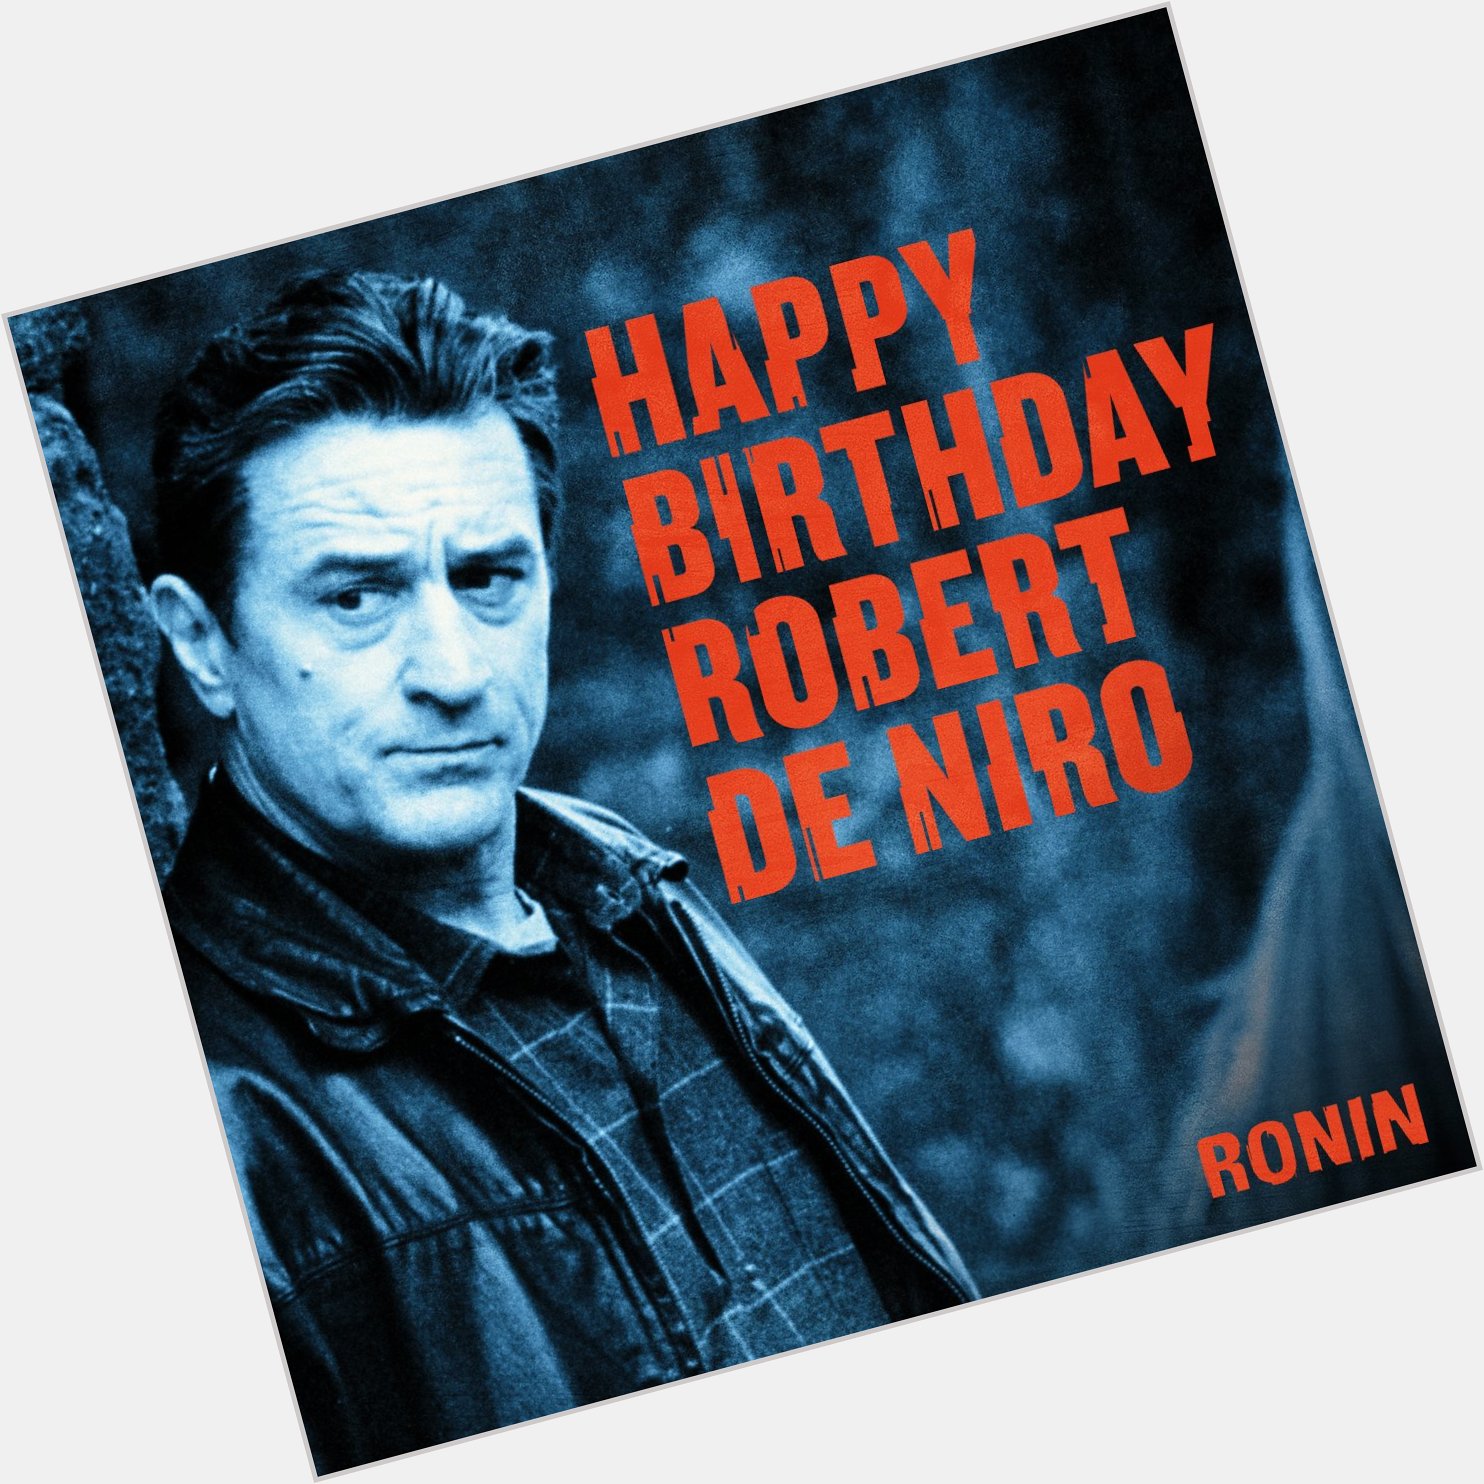 Leave a in the comments to wish Robert De Niro a happy birthday! 